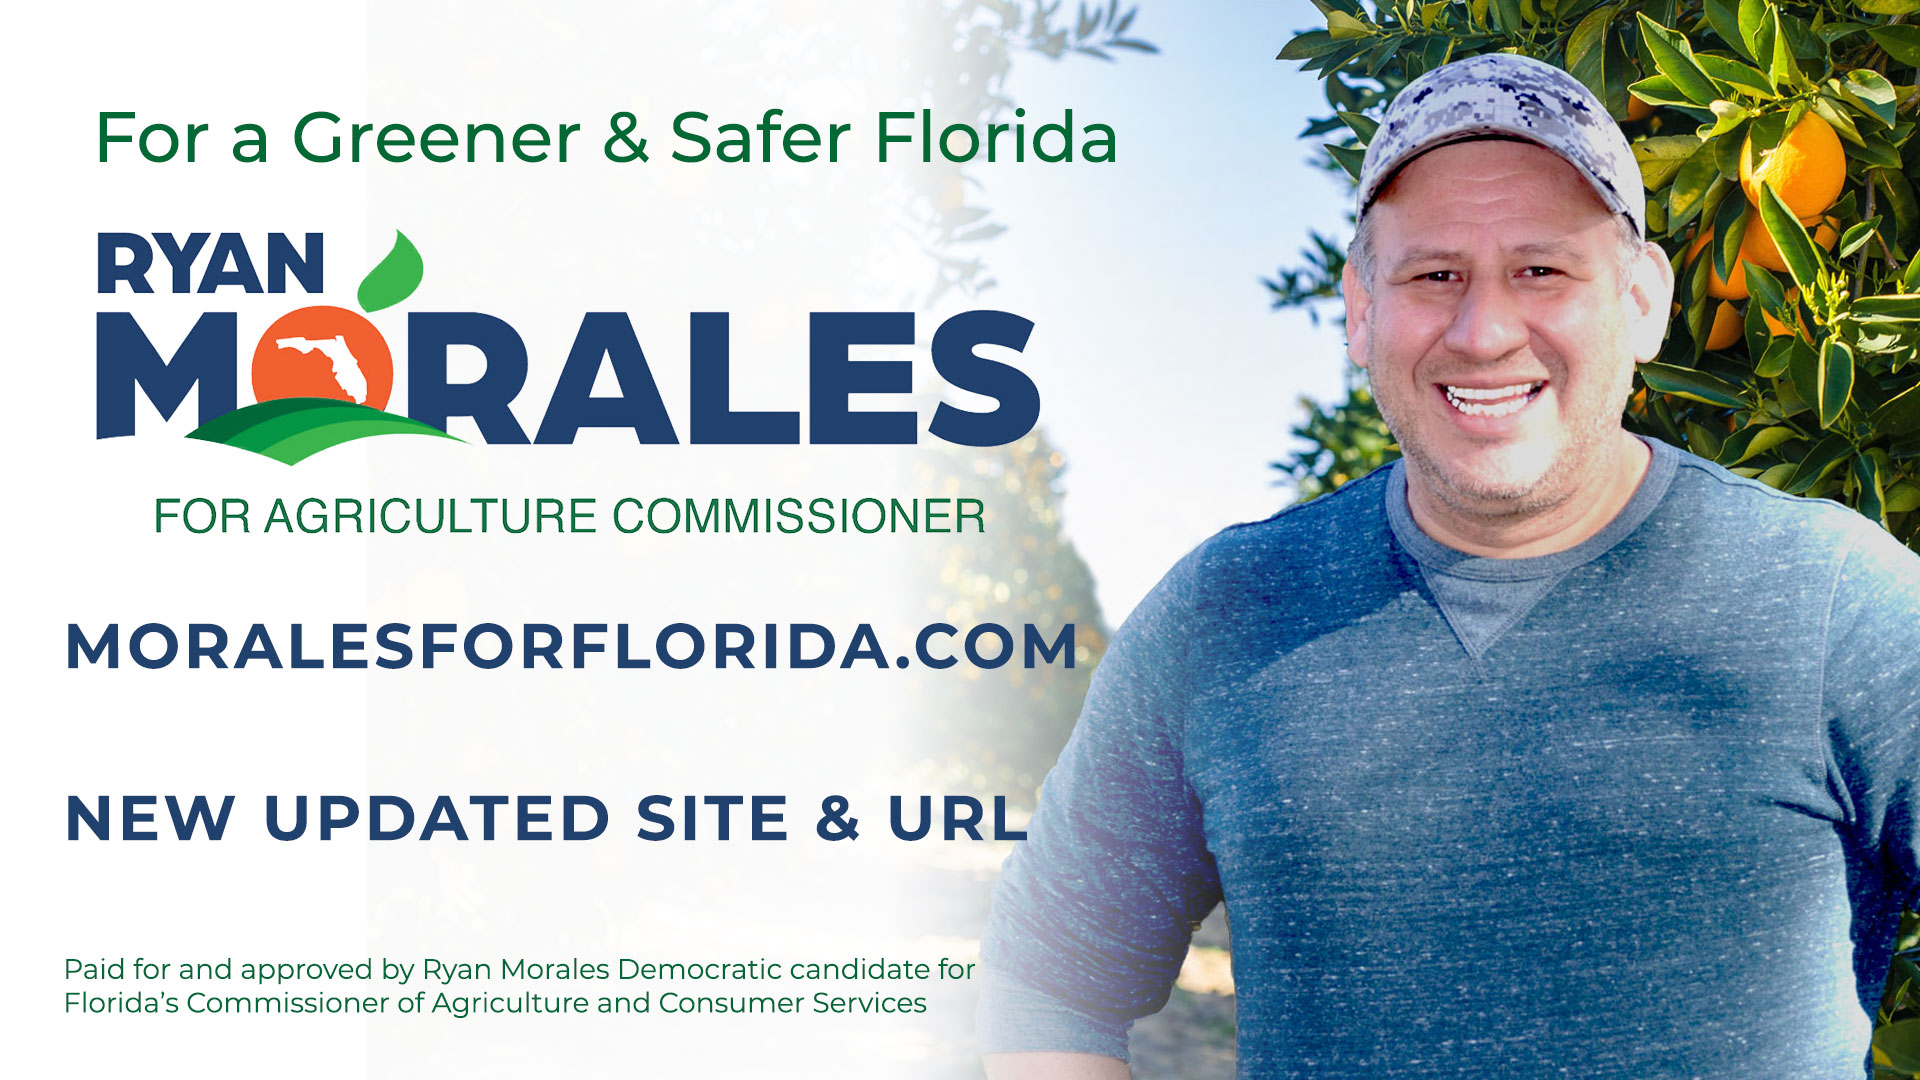 Morales For Florida